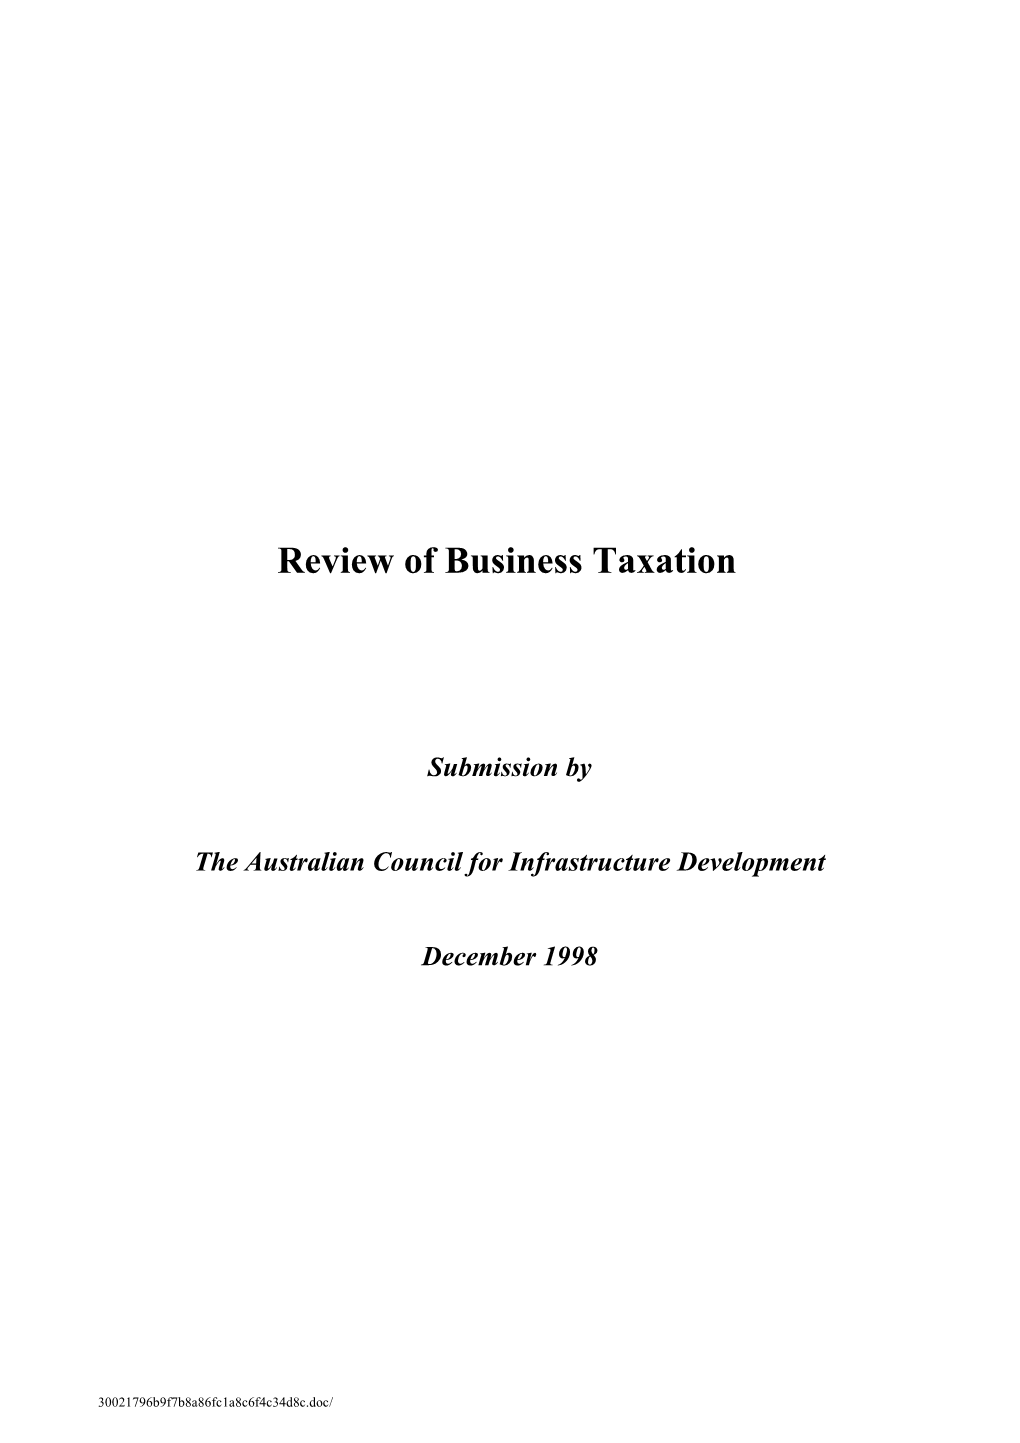 Review of Business Taxation